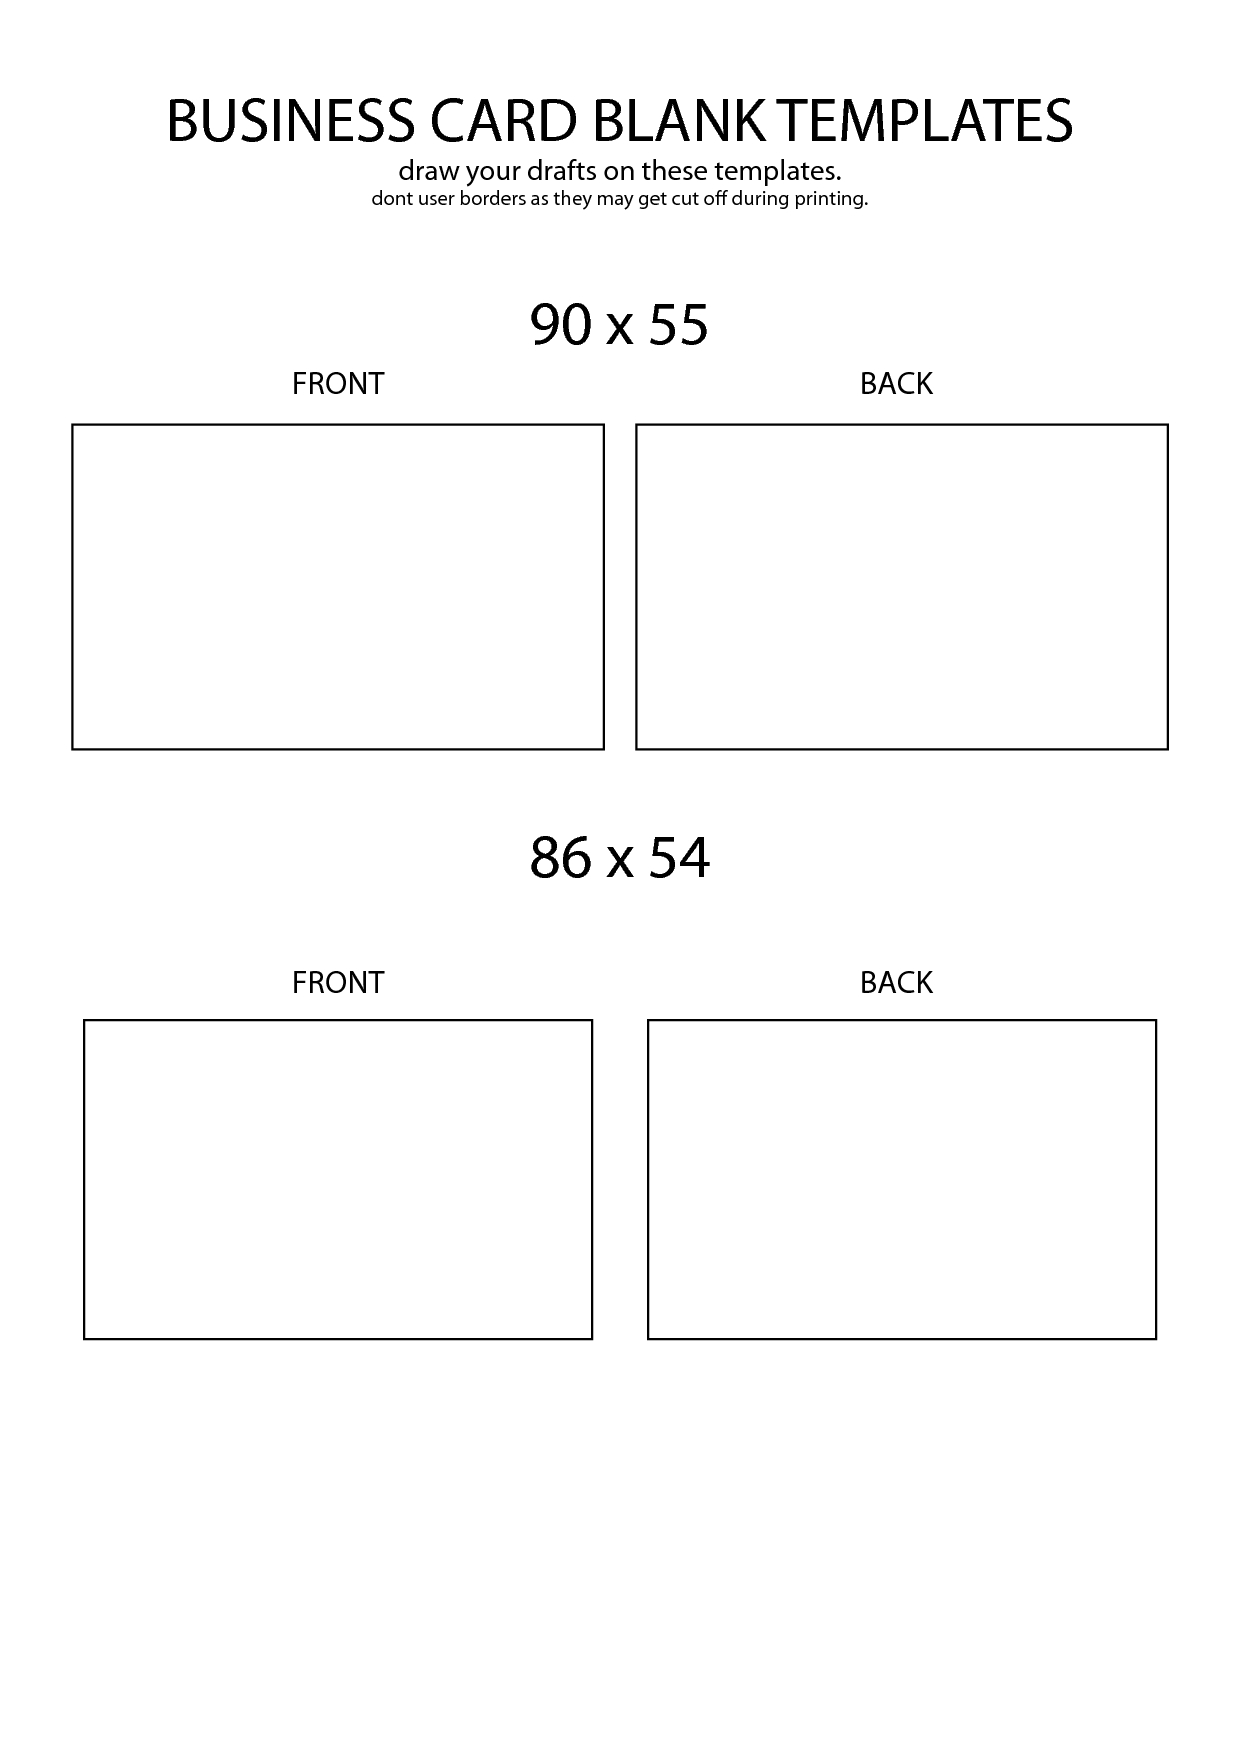 9 Blank Business Card Template Images - Avery Blank Business Card Throughout Blank Business Card Template Download